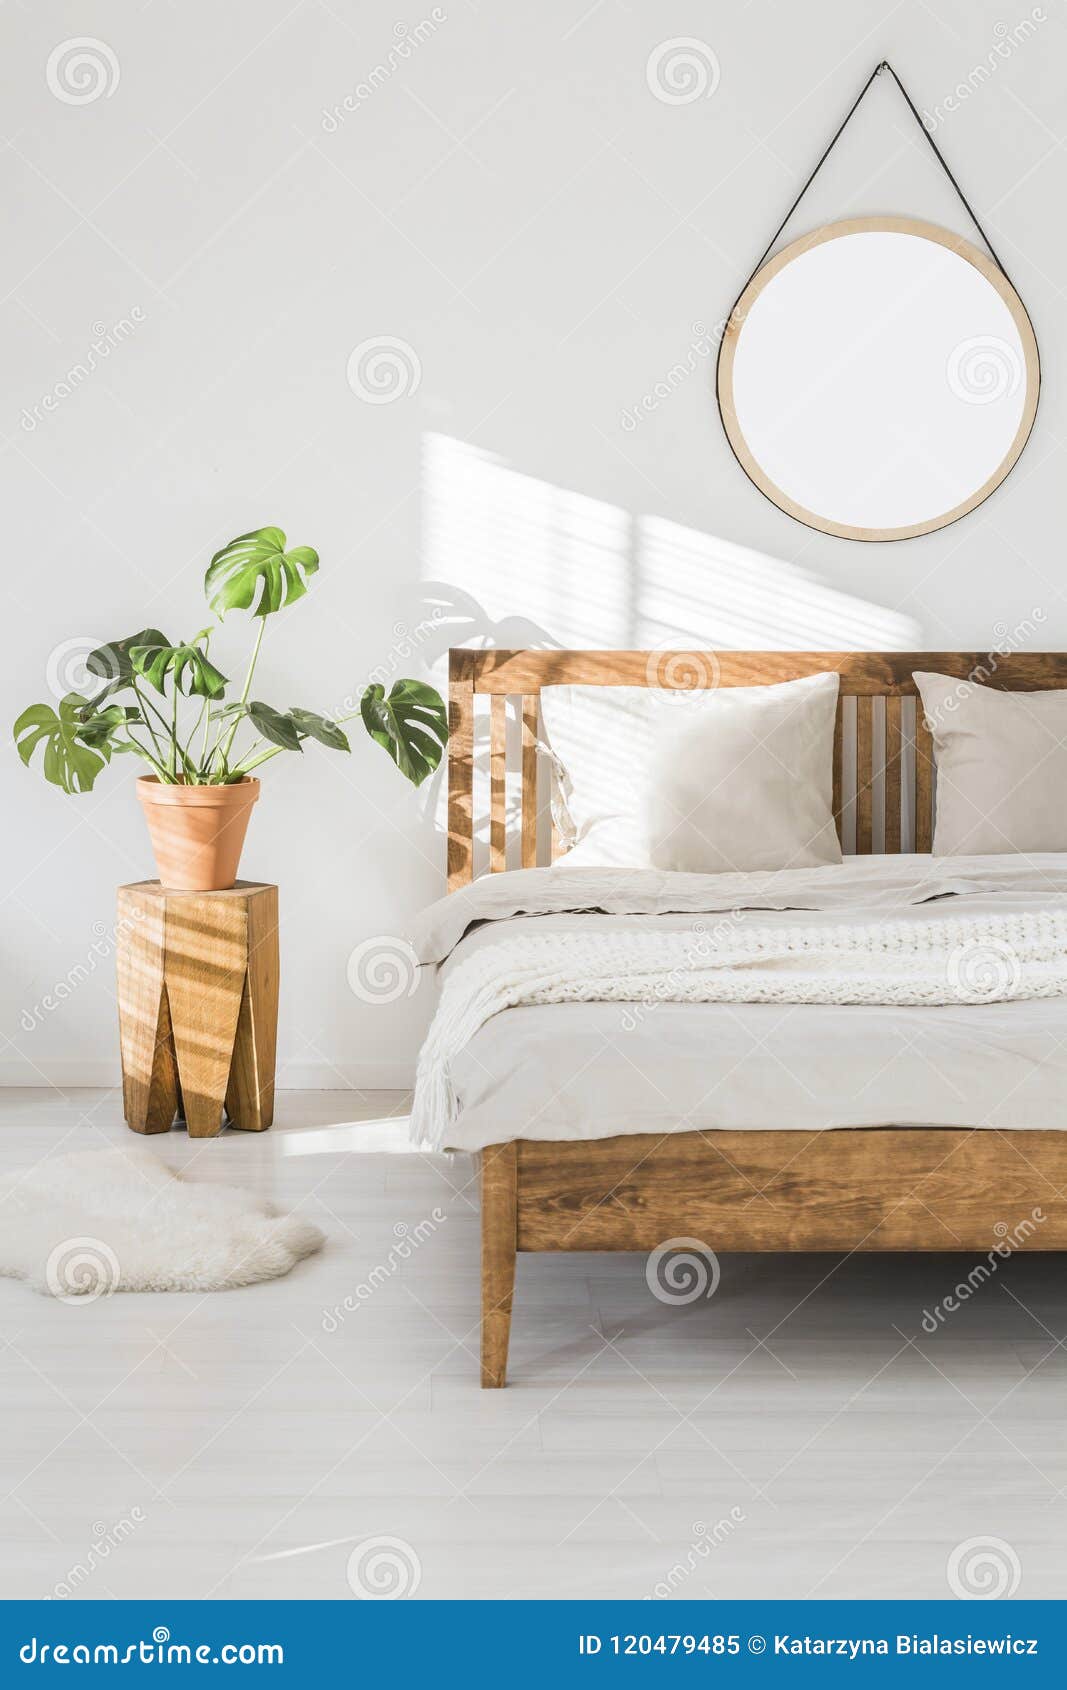 monstera plant on a tree trunk night stand and a round mirror on a white wall in a sunlit bedroom interior with wooden furniture